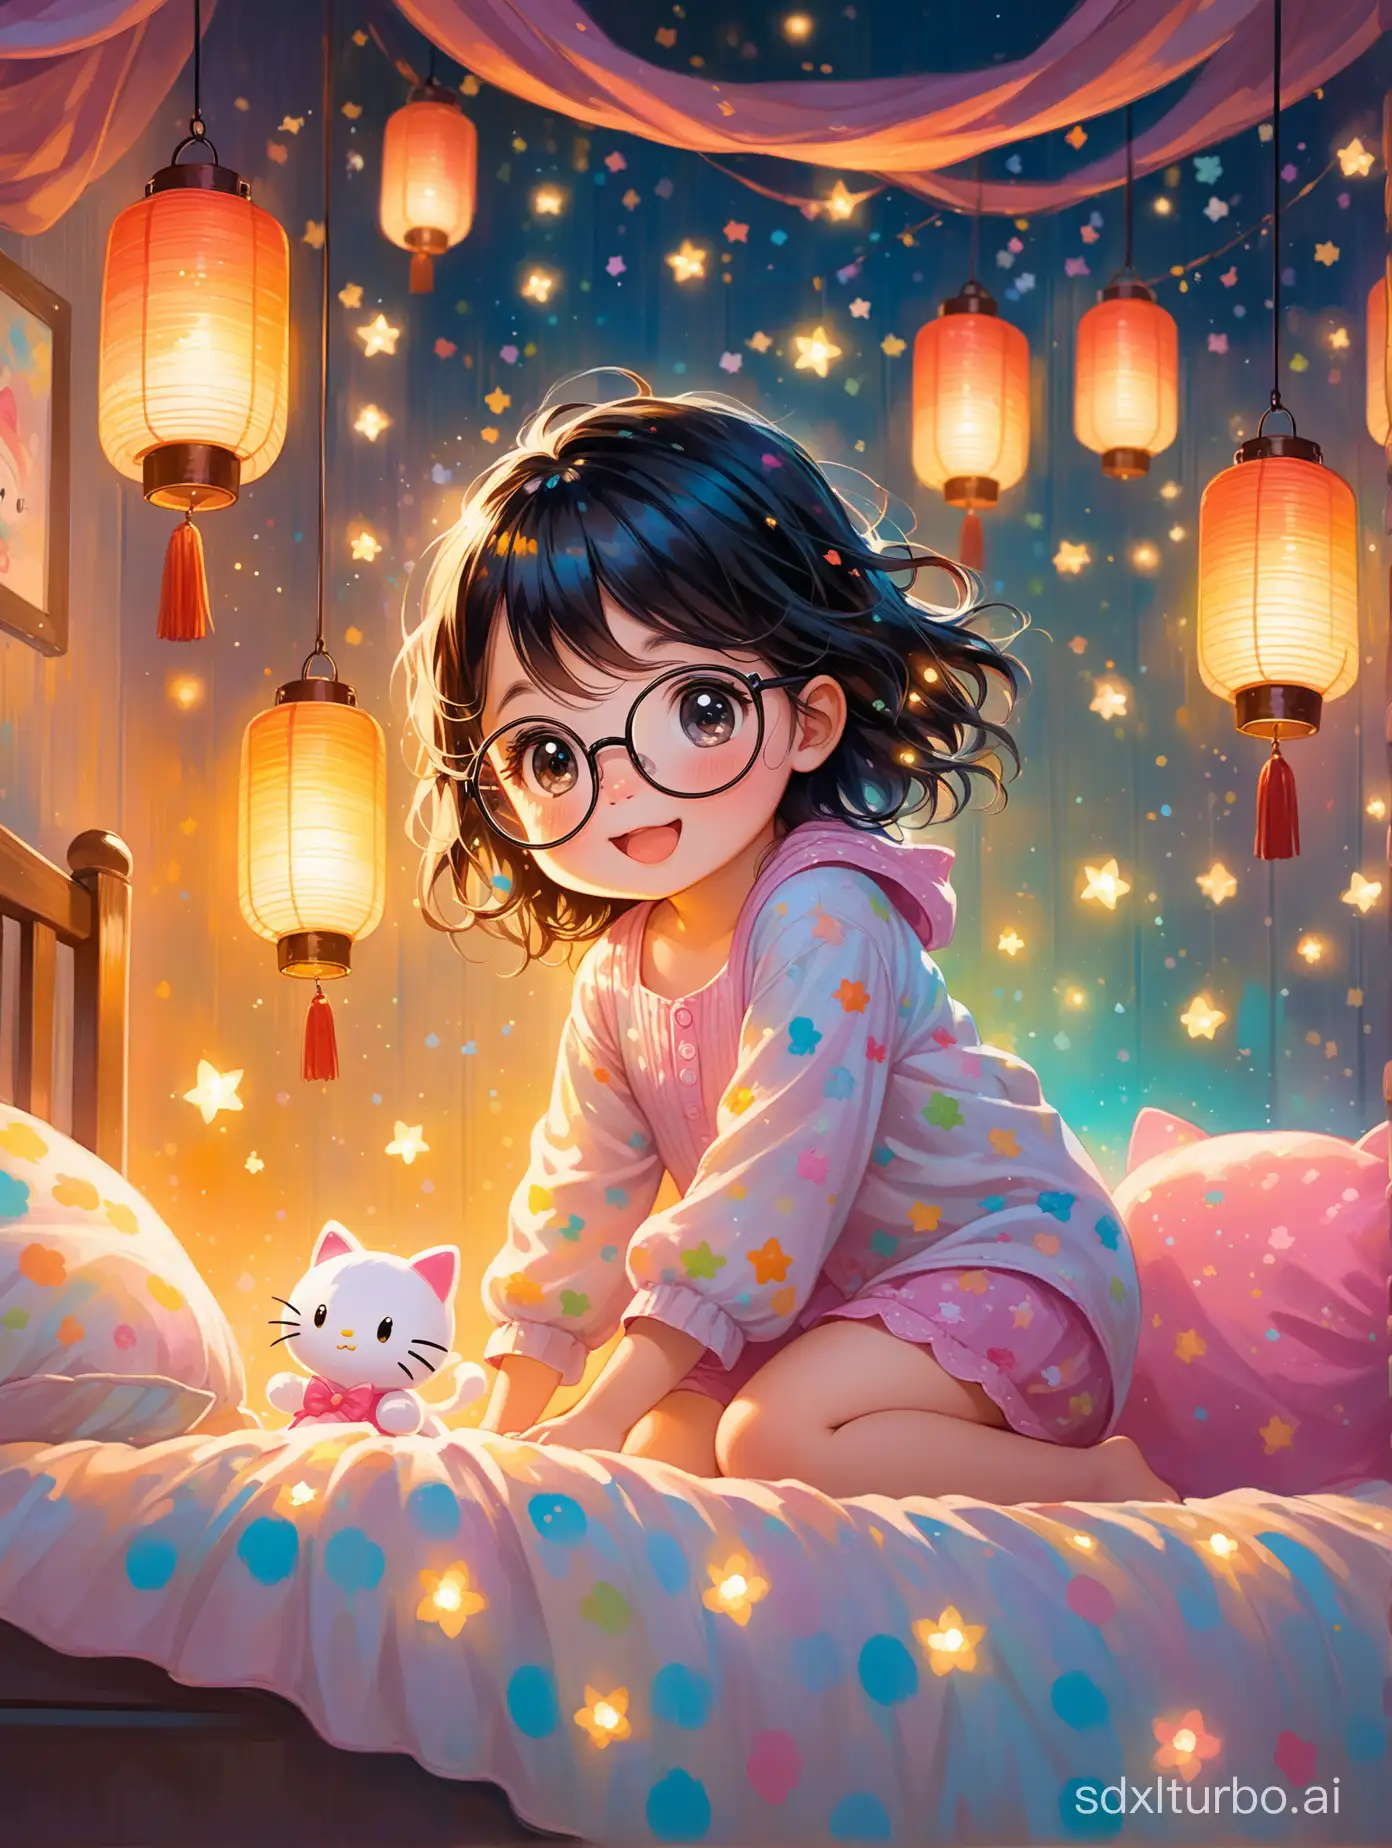 A whimsical, painterly fantasy oil painting of a toddler girl with crazy messy black hair and black glasses, giggling as she plays hide and seek with a small, friendly Hello Kitty under her bed, in a cozy bedroom adorned with magical floating lanterns. The room is filled with soft oil paint splatters, intuitive muted colors, and soft brush strokes, creating an adorable, inviting scene. Enchanting, playful atmosphere, fantasy companions, magical glow, dreamlike quality.